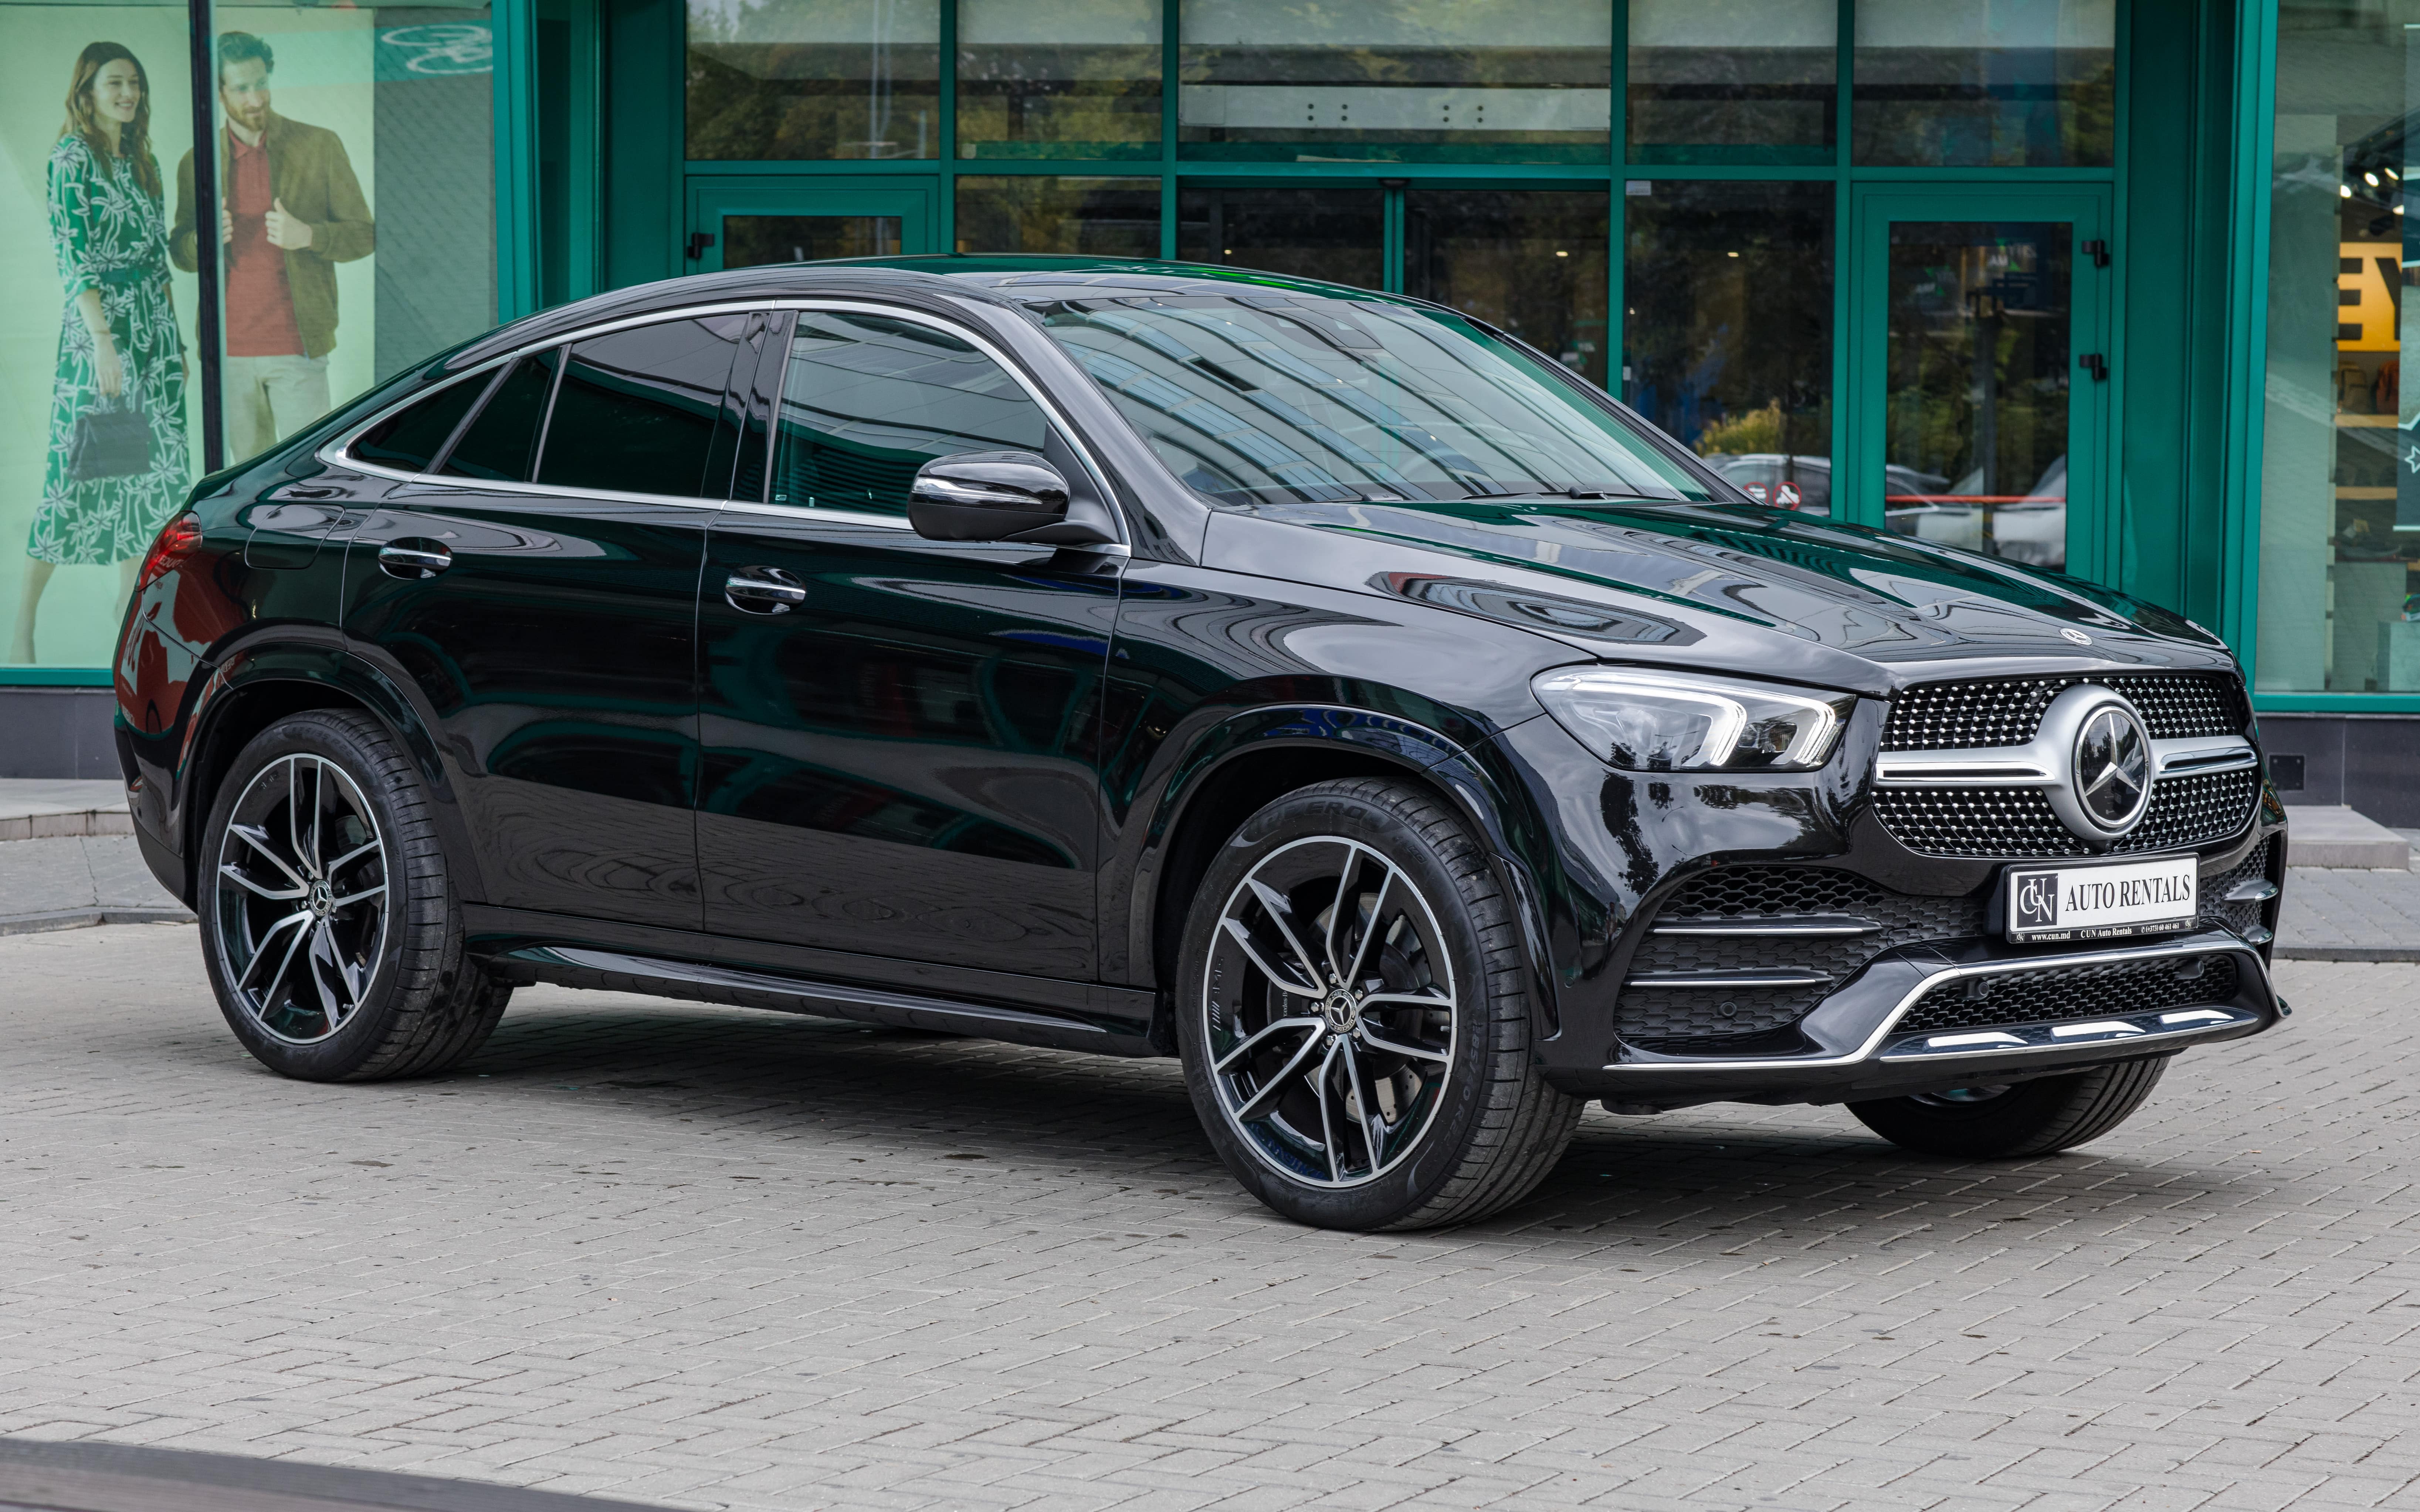 GLE 400 d 4MATIC Coupe obsidian black - Photo 1